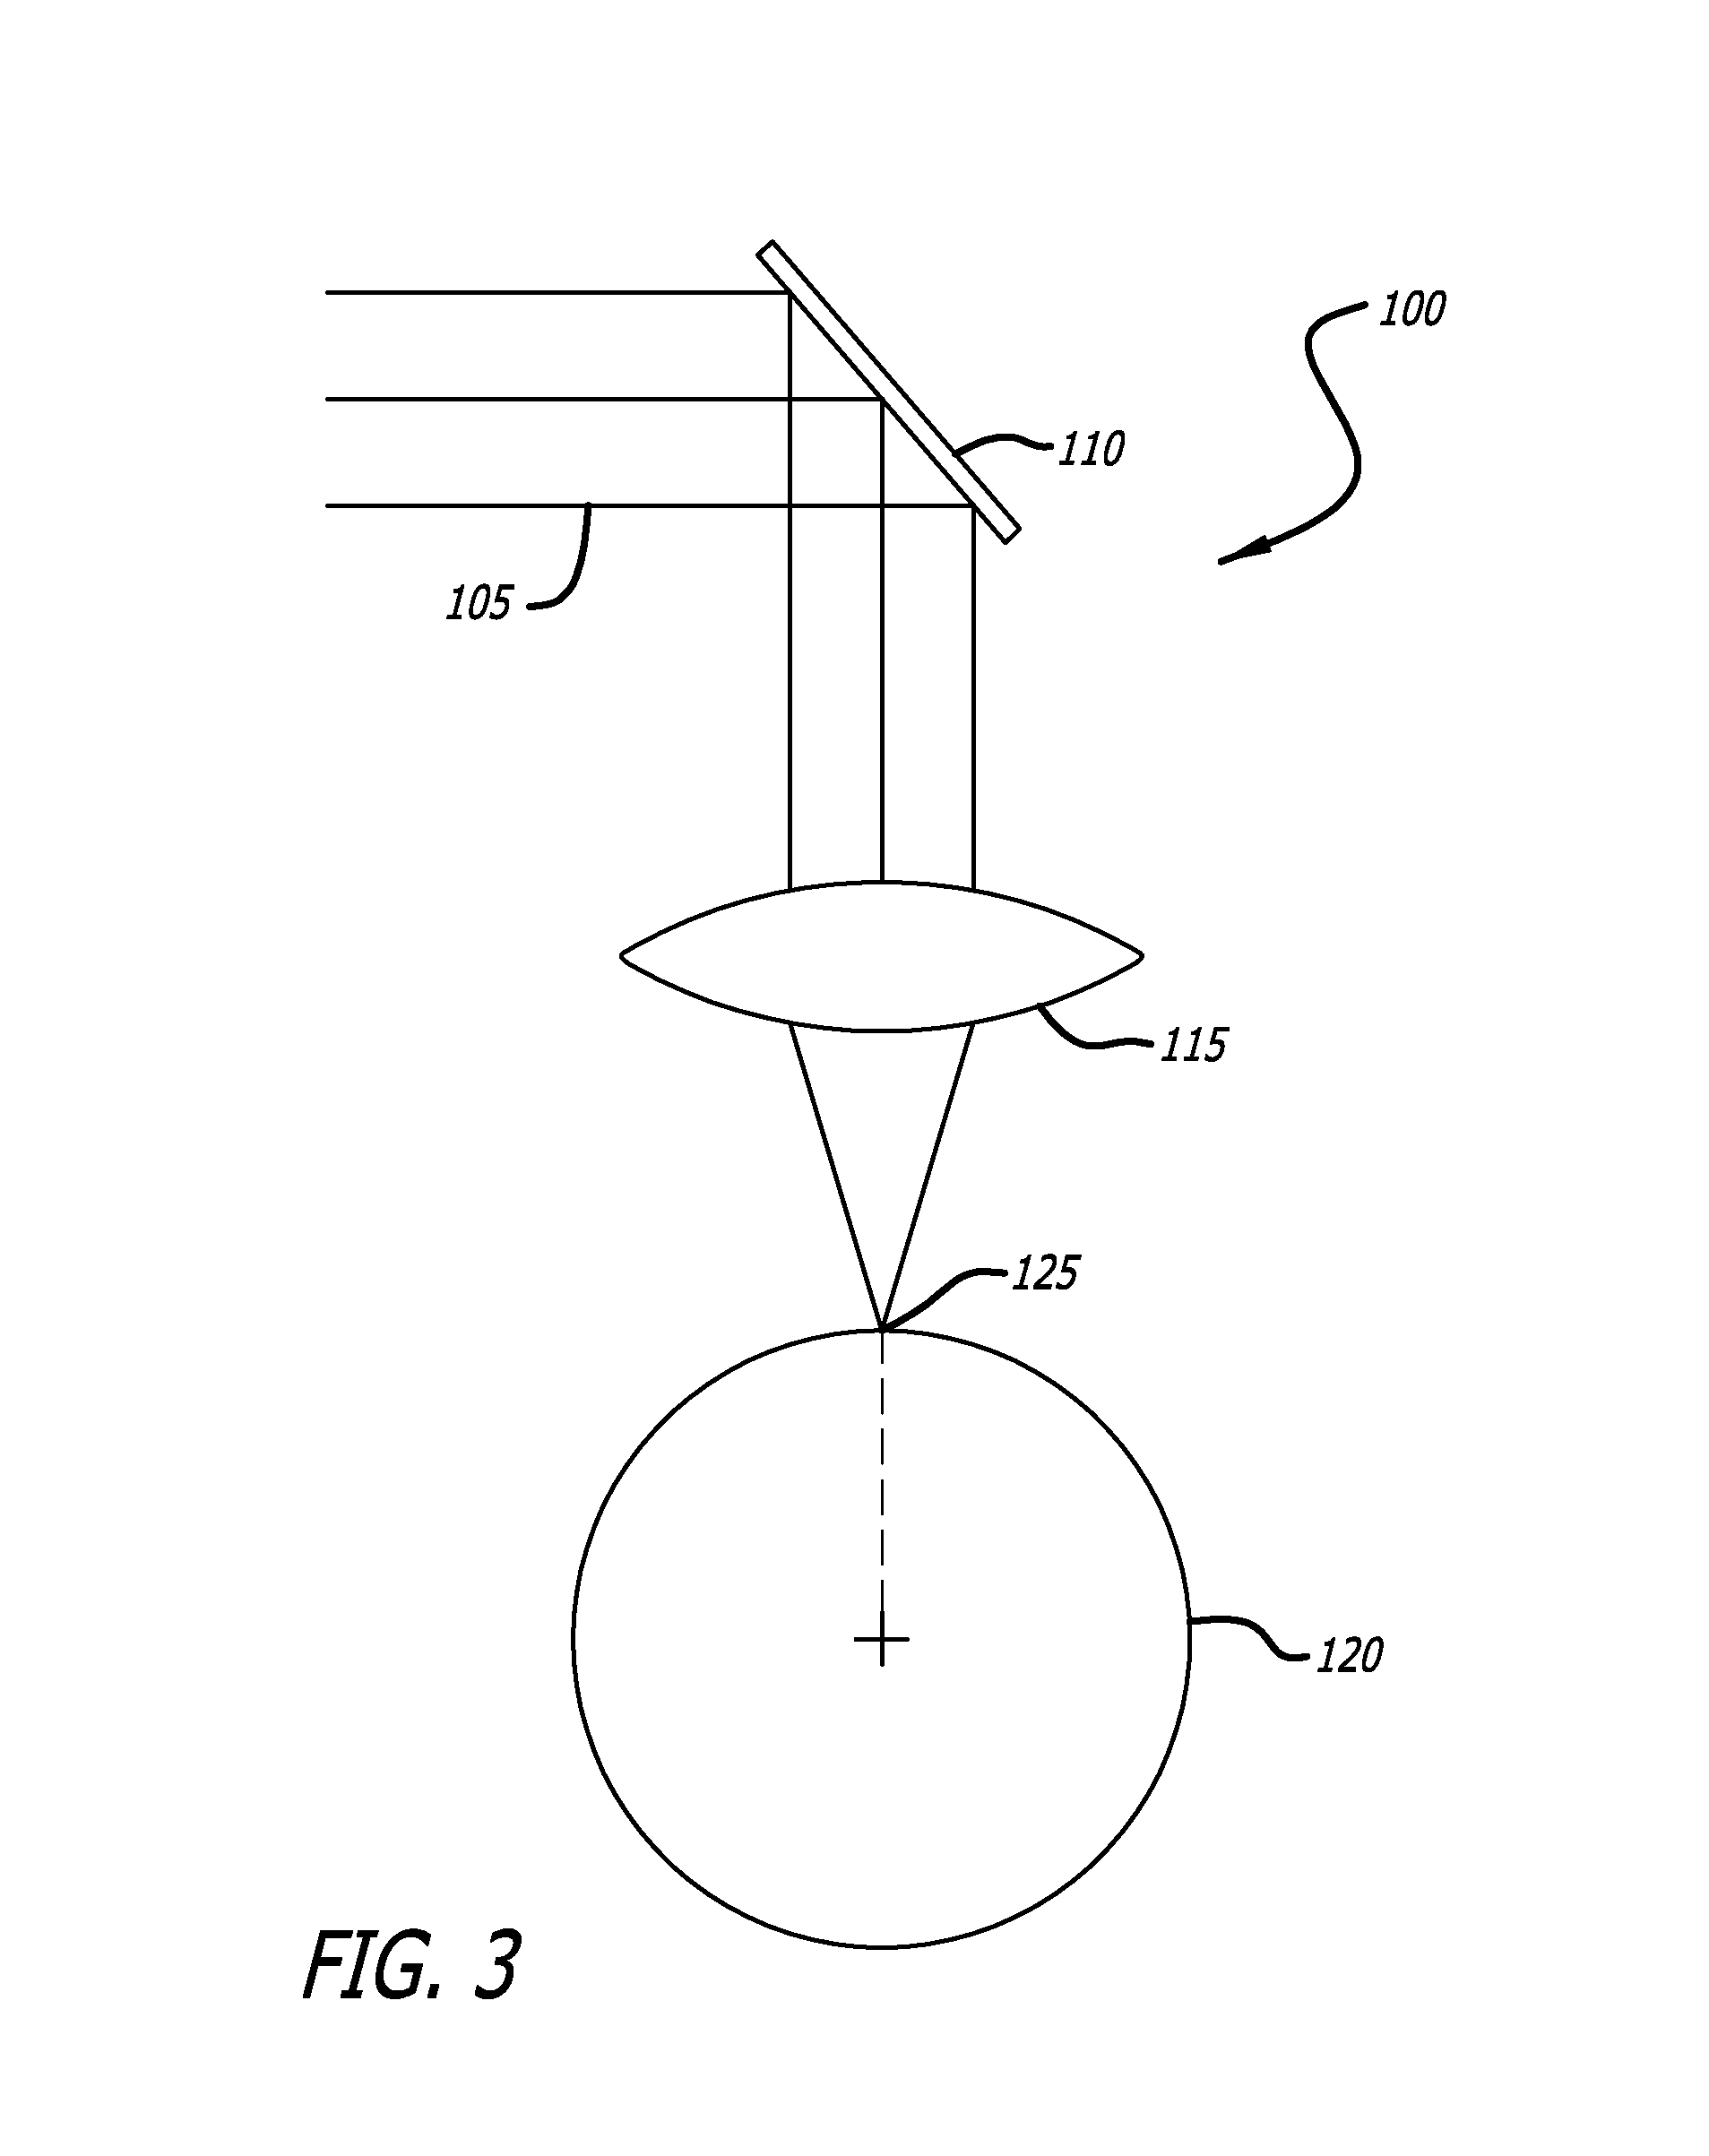 Laser optics with lateral and angular shift compensation